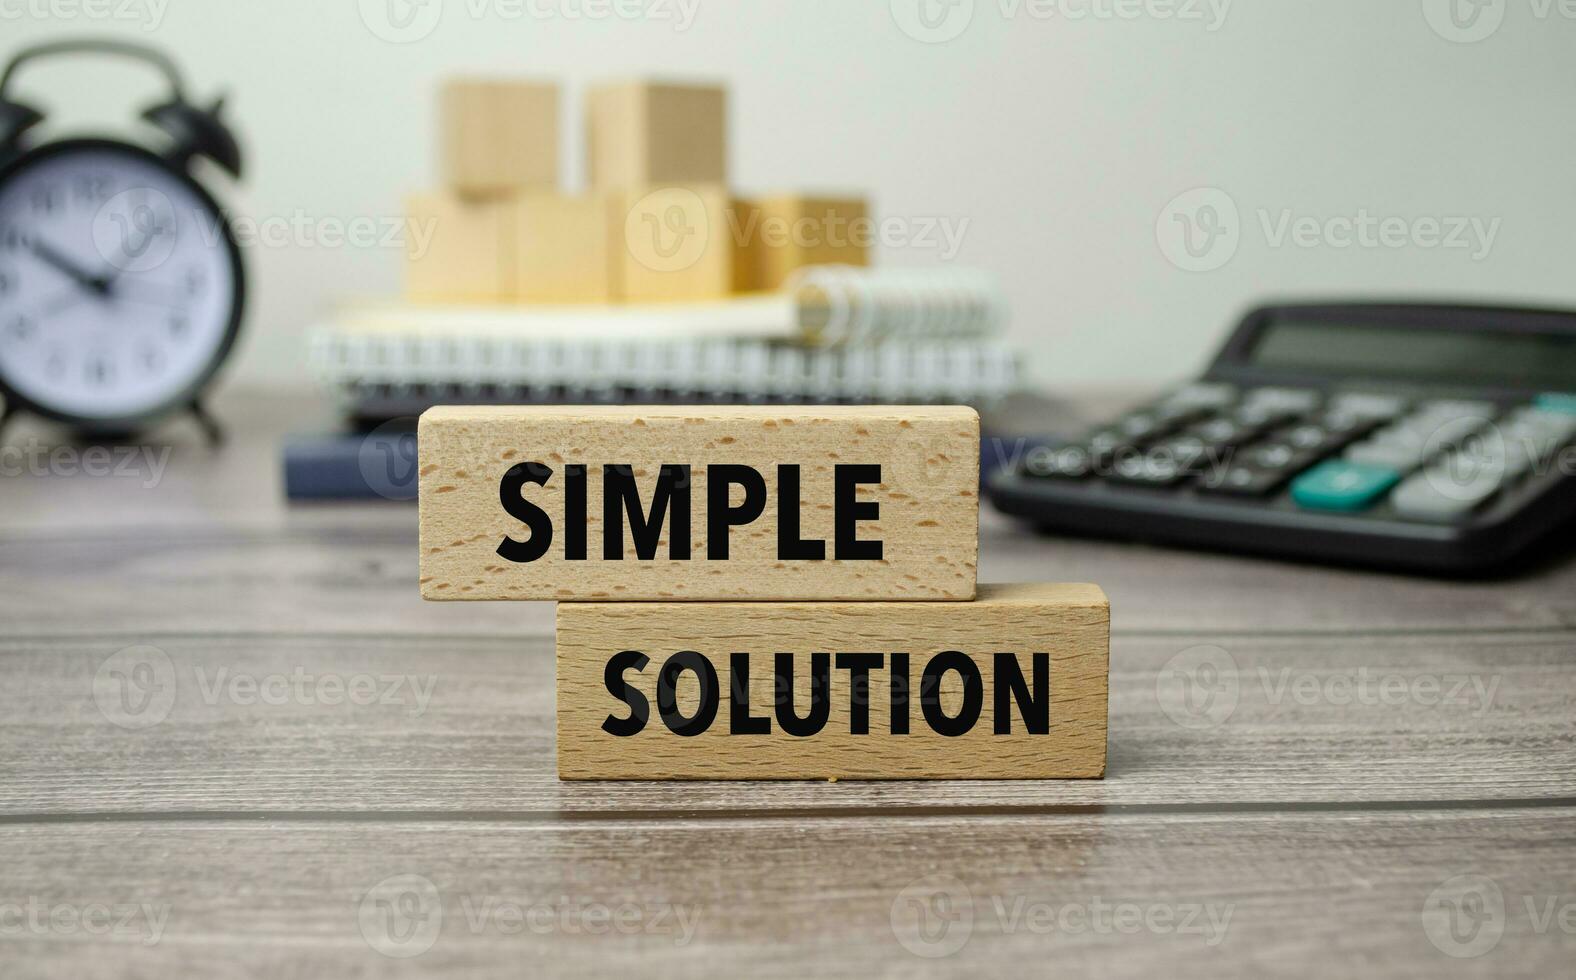 simple solution is shown on a conceptual photo using wooden blocks